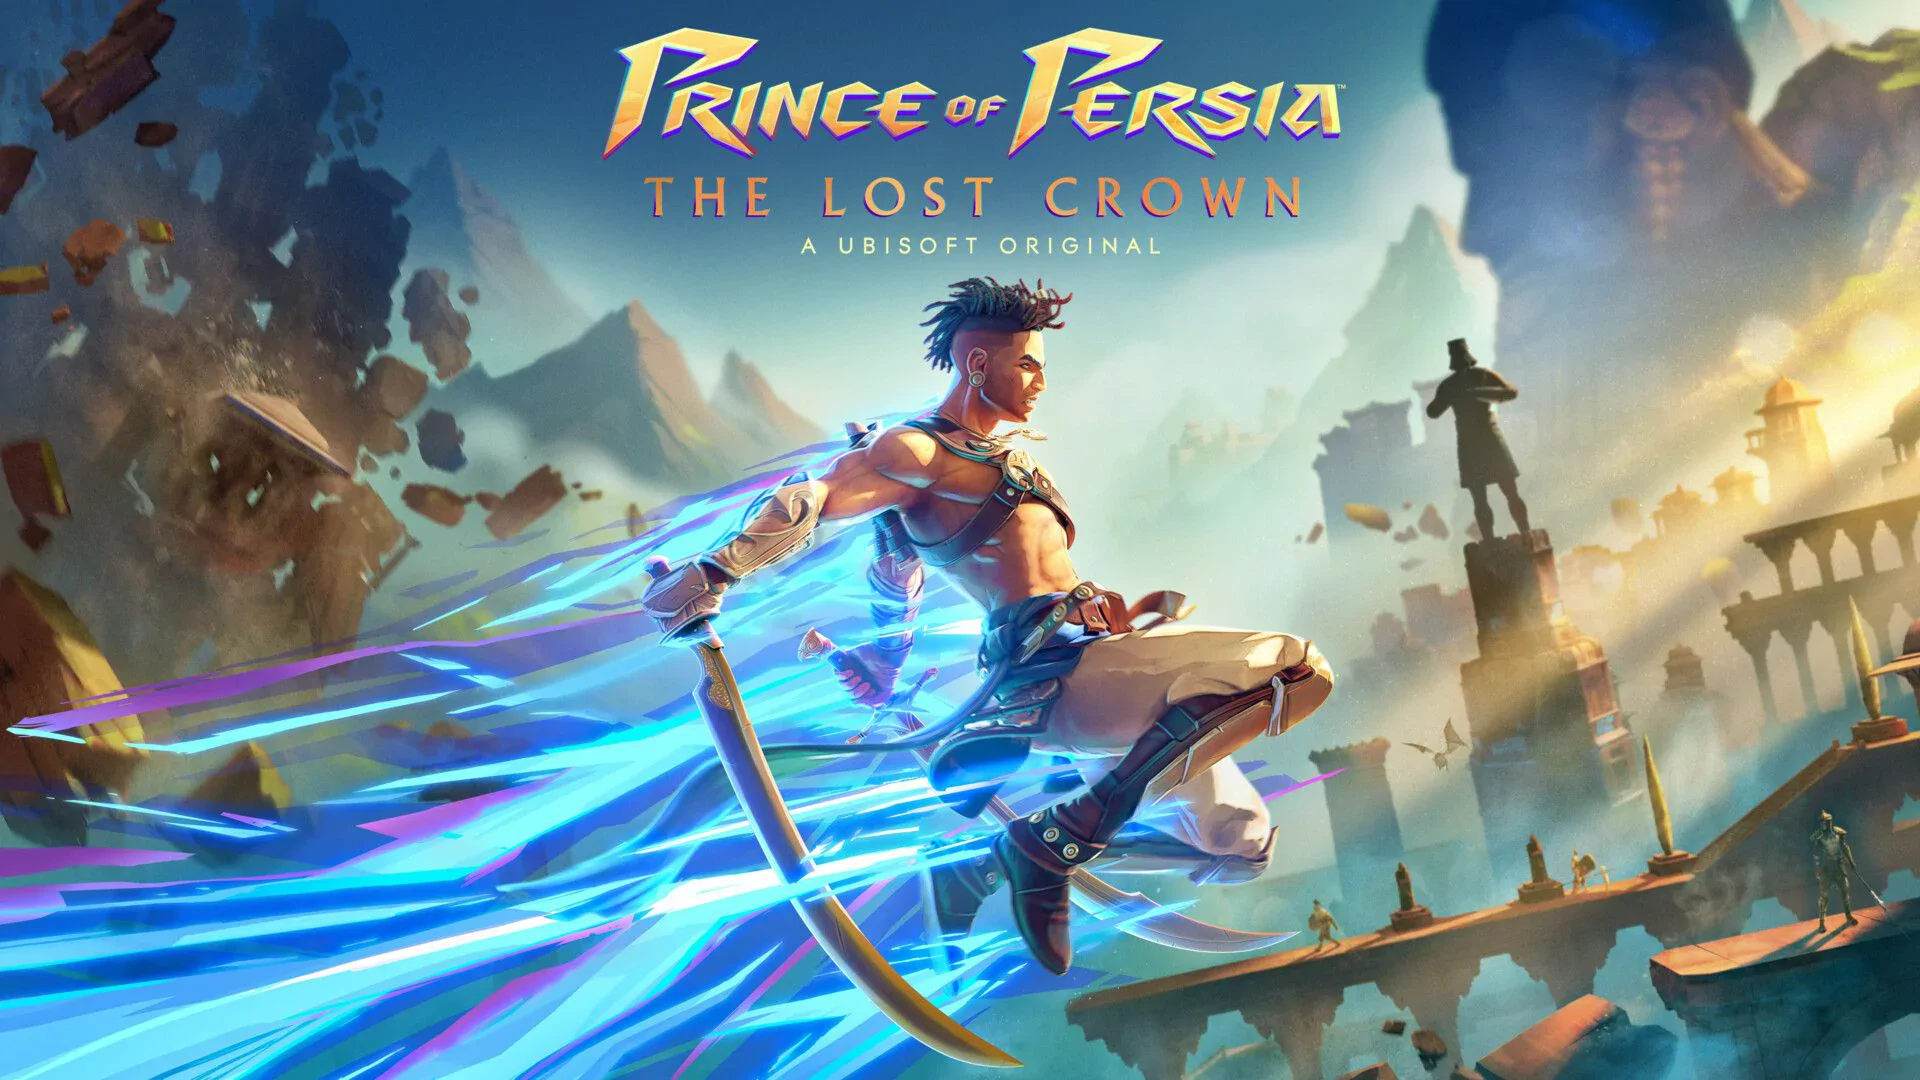 Prince of Persia: The Lost Crown – recenzja gry. Muala!